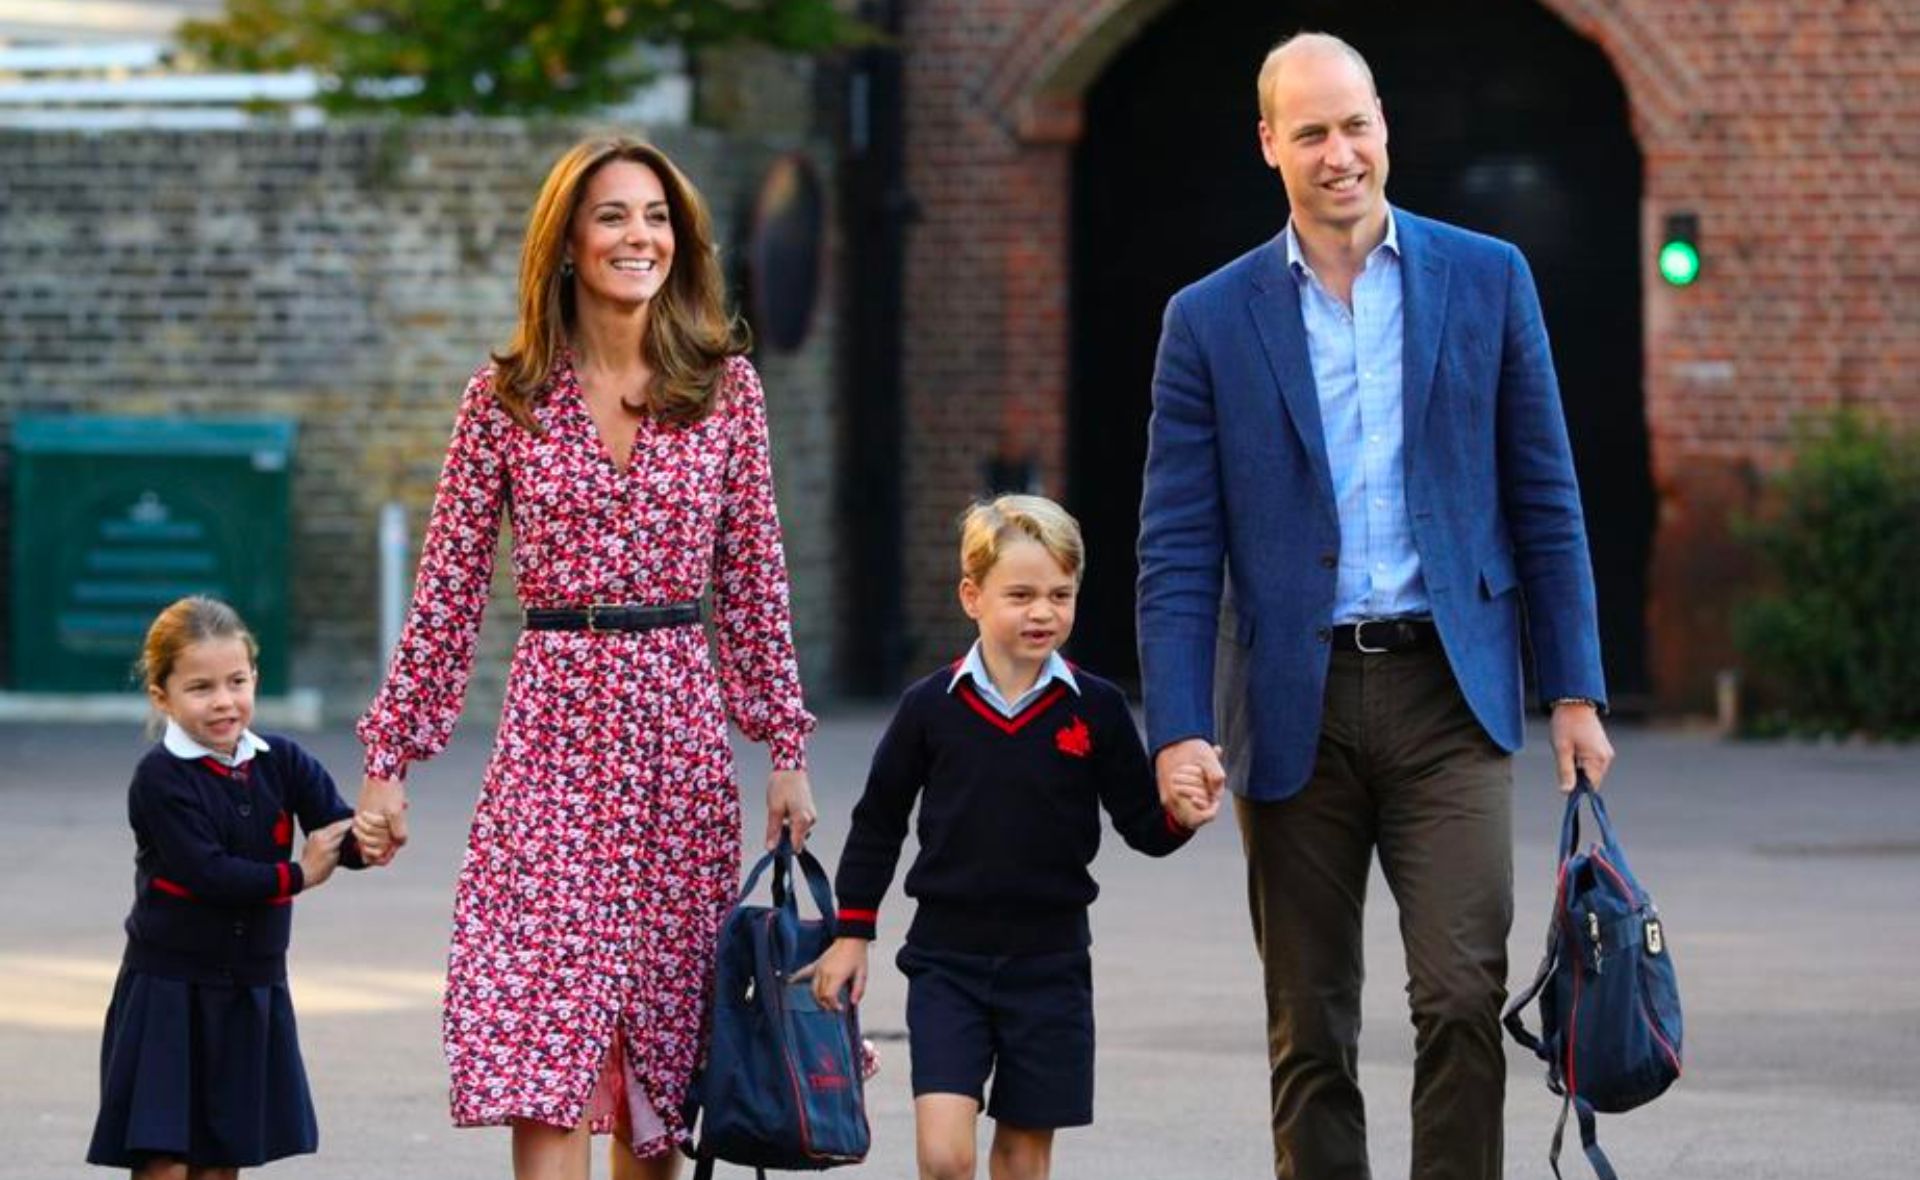 Prince William is determined to start performing this one fatherly role for his children